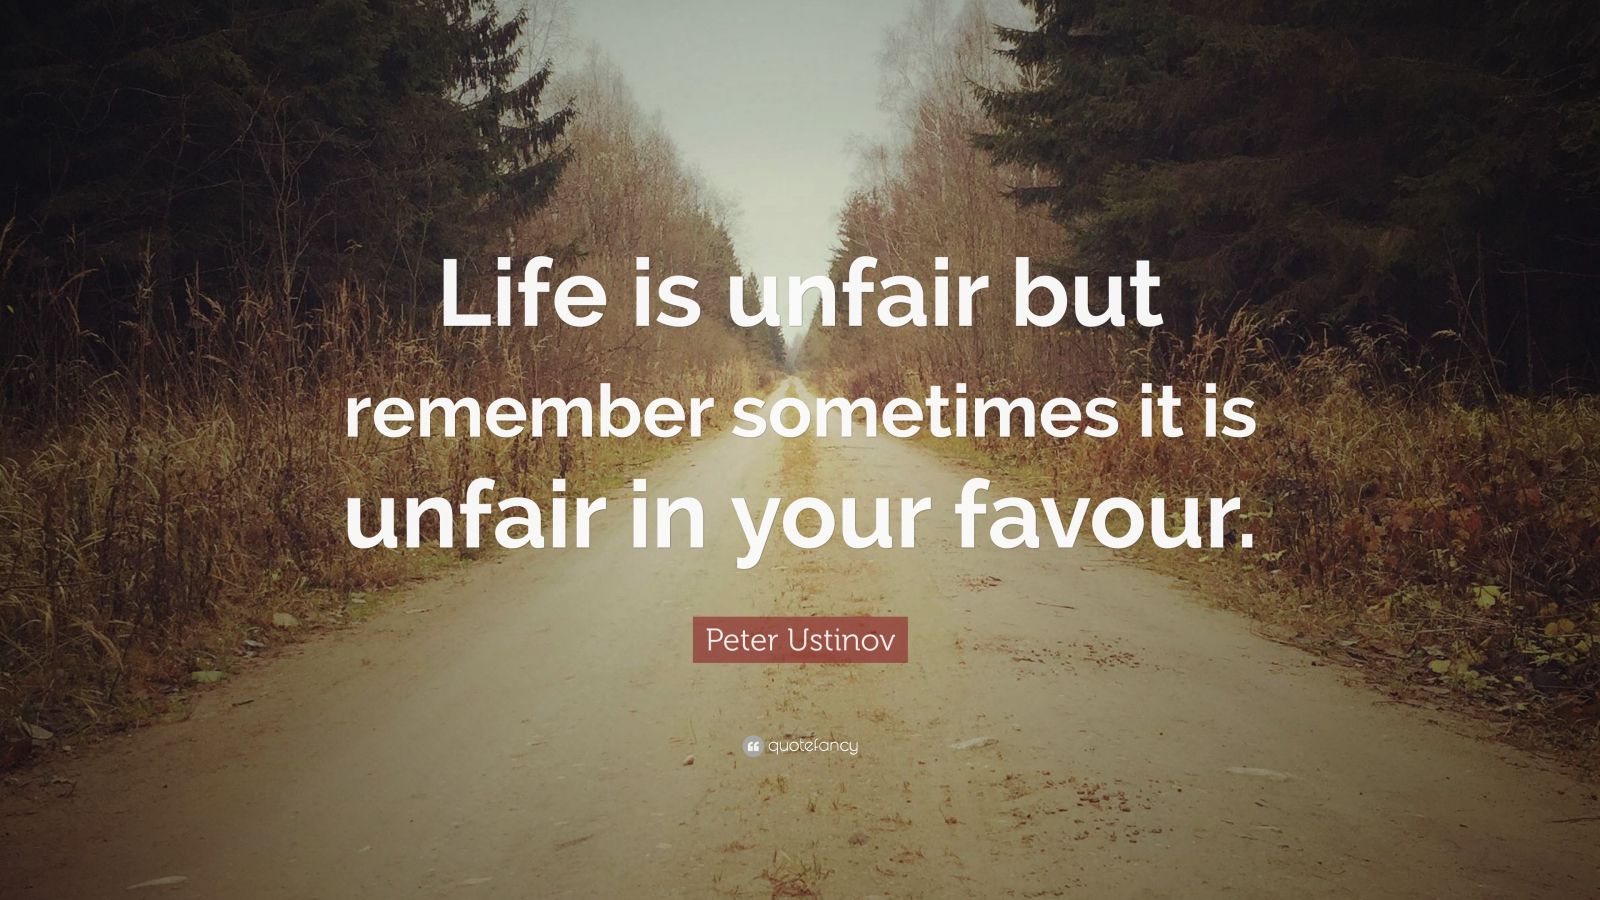 Peter Ustinov Quote: “Life is unfair but remember sometimes it is